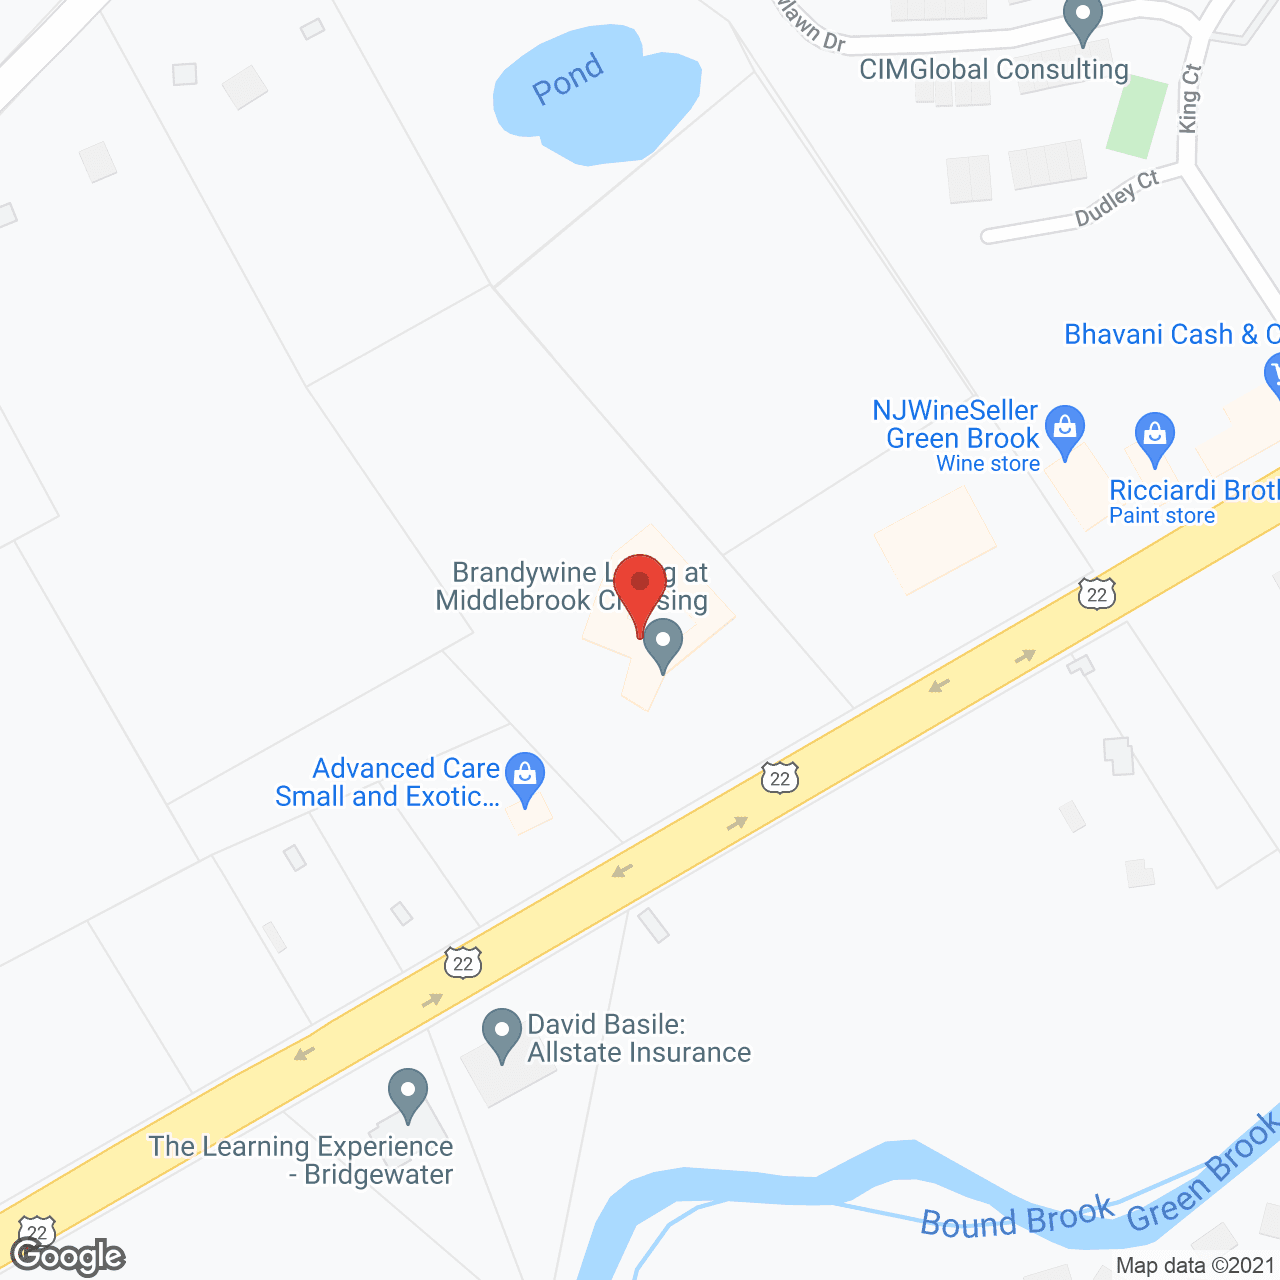 Brandywine at Middlebrook Crossing in google map